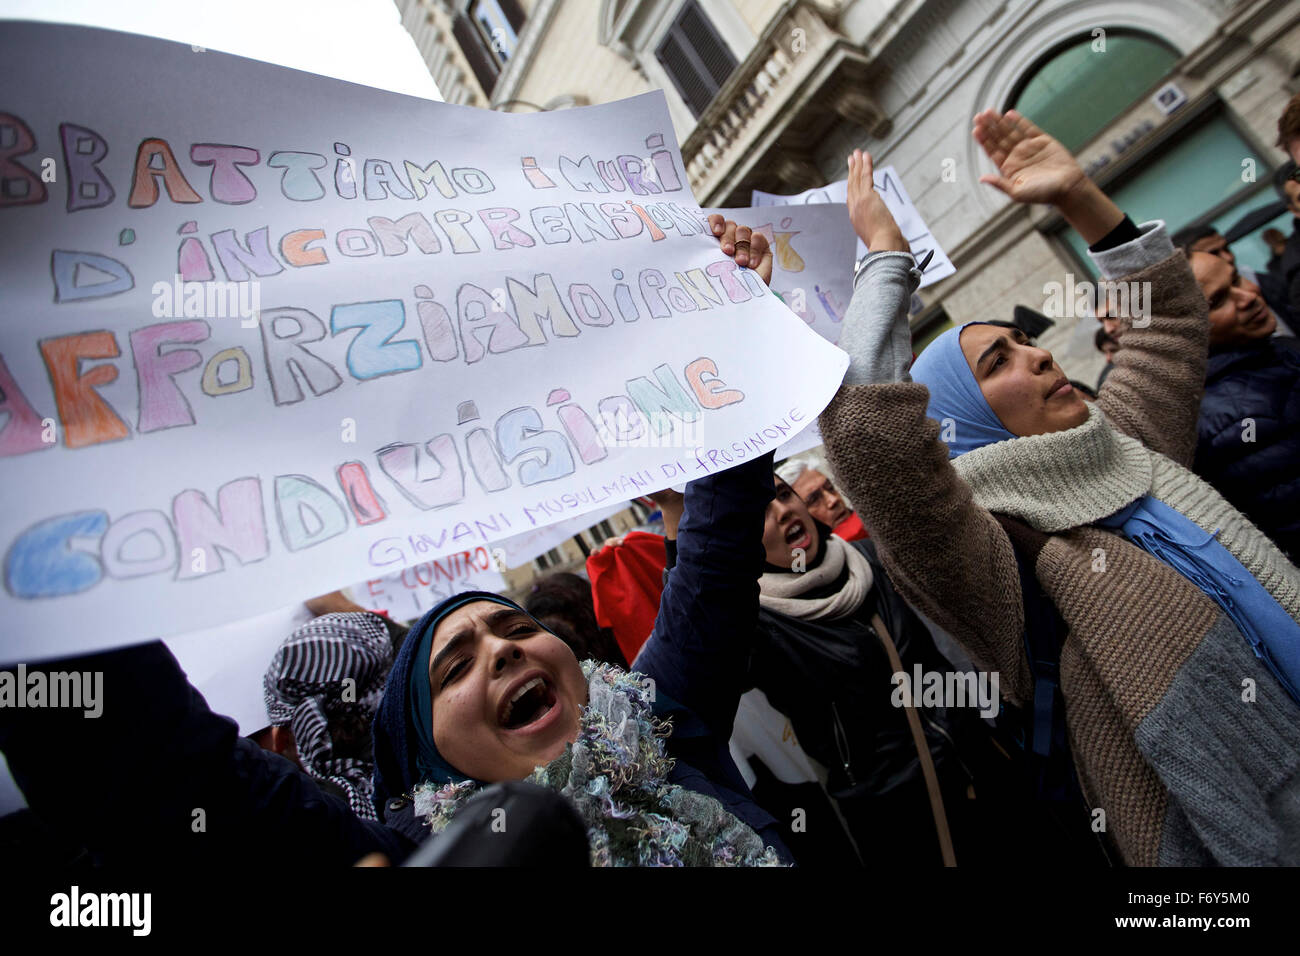 Rome, Italy. 21st Nov, 2015. Women shout slogans with a banner reading "Let's break down the walls of misunderstanding, let's strengthen the bridges of sharing" during a demonstration in Rome, Italy, on Nov. 21, 2015. A demonstration launched by Islamic communities with the theme "Not in My Name" is held here on Saturday to protest against the Paris terror attacks. Credit:  Jin Yu/Xinhua/Alamy Live News Stock Photo